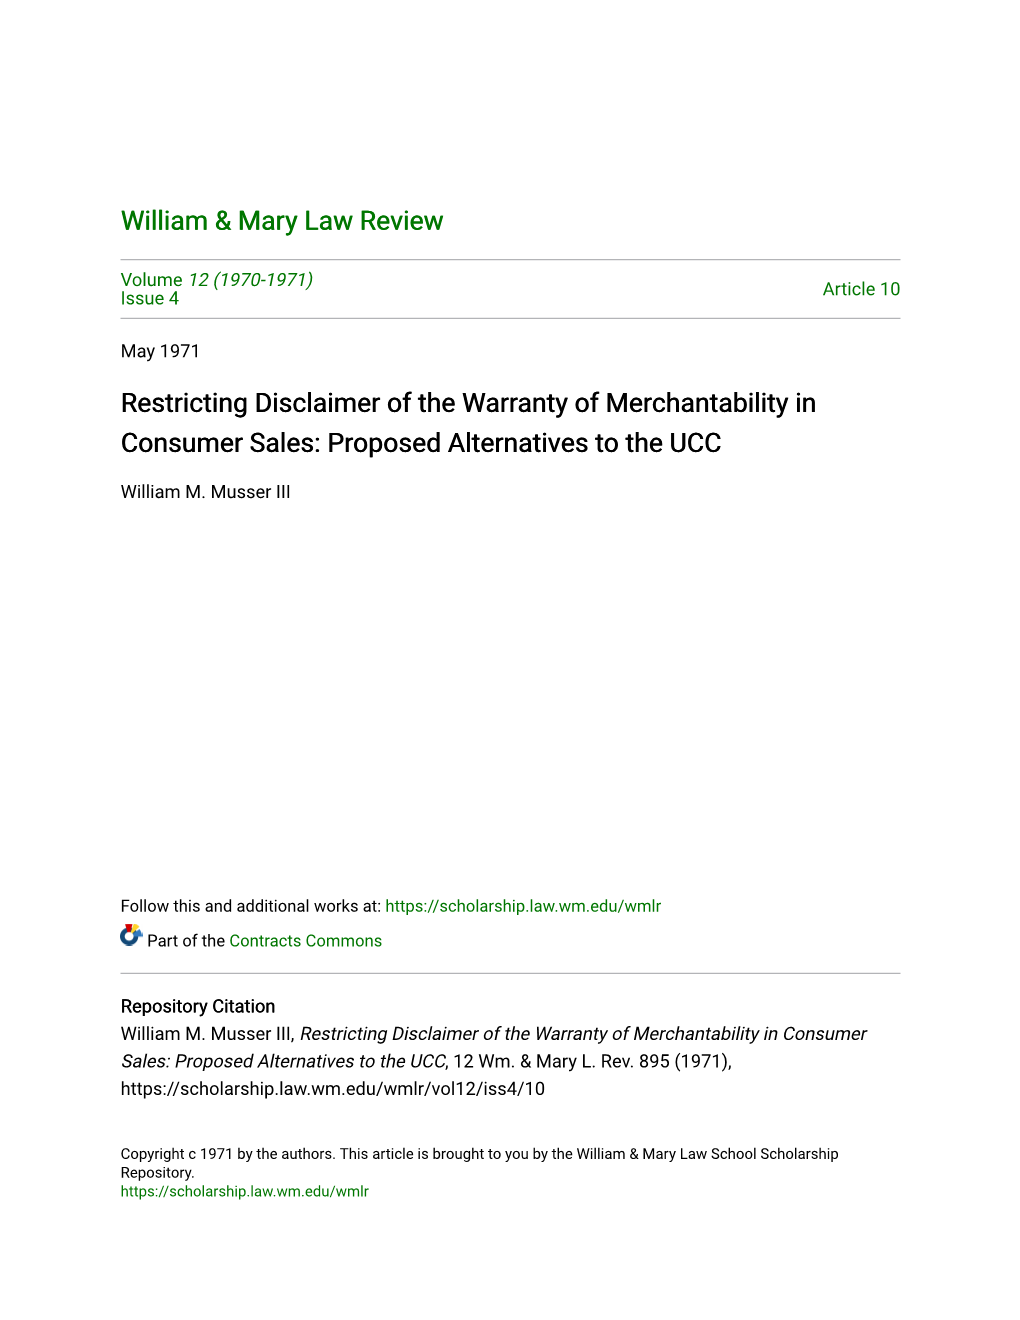 Restricting Disclaimer of the Warranty of Merchantability in Consumer Sales: Proposed Alternatives to the UCC